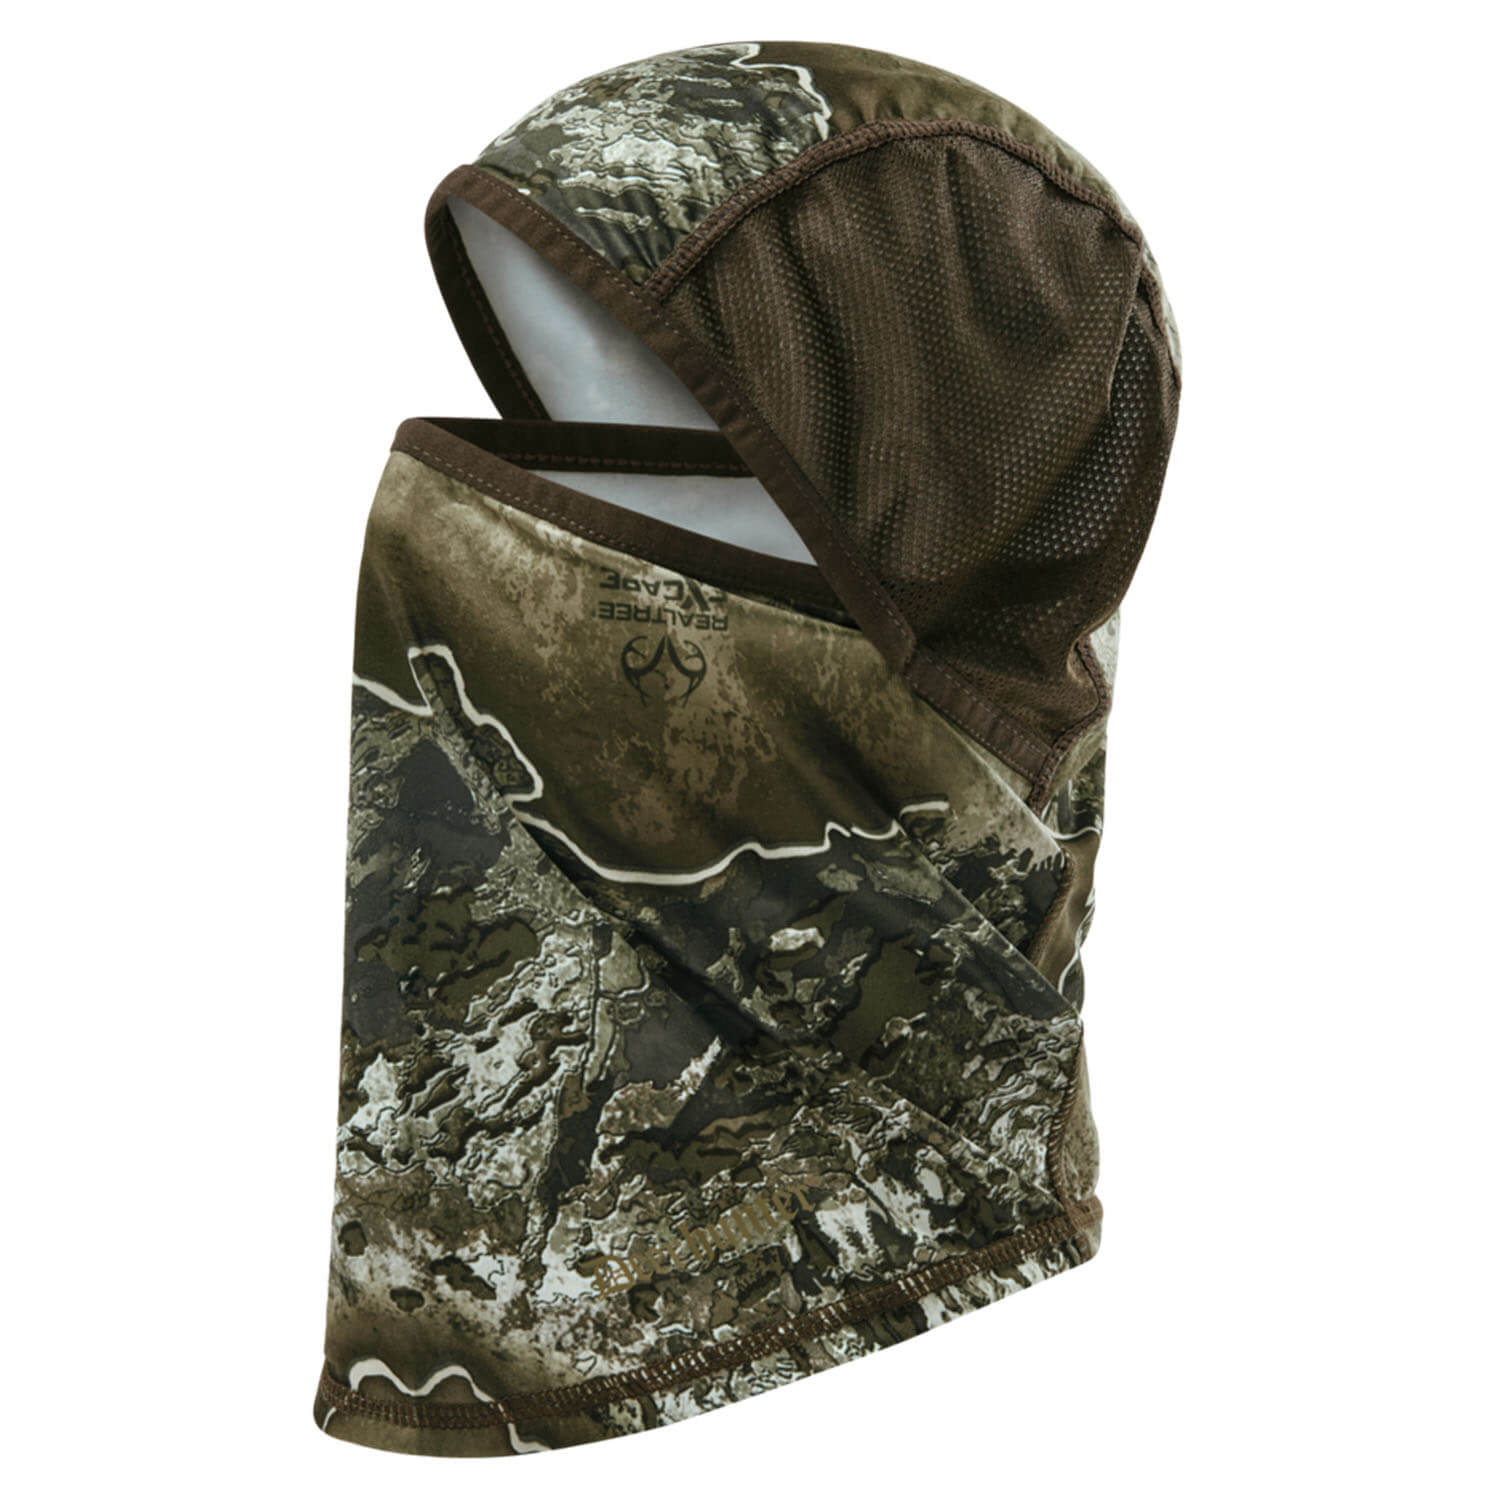 Deerhunter facemask excape (realtree excape) - Camouflage Masks